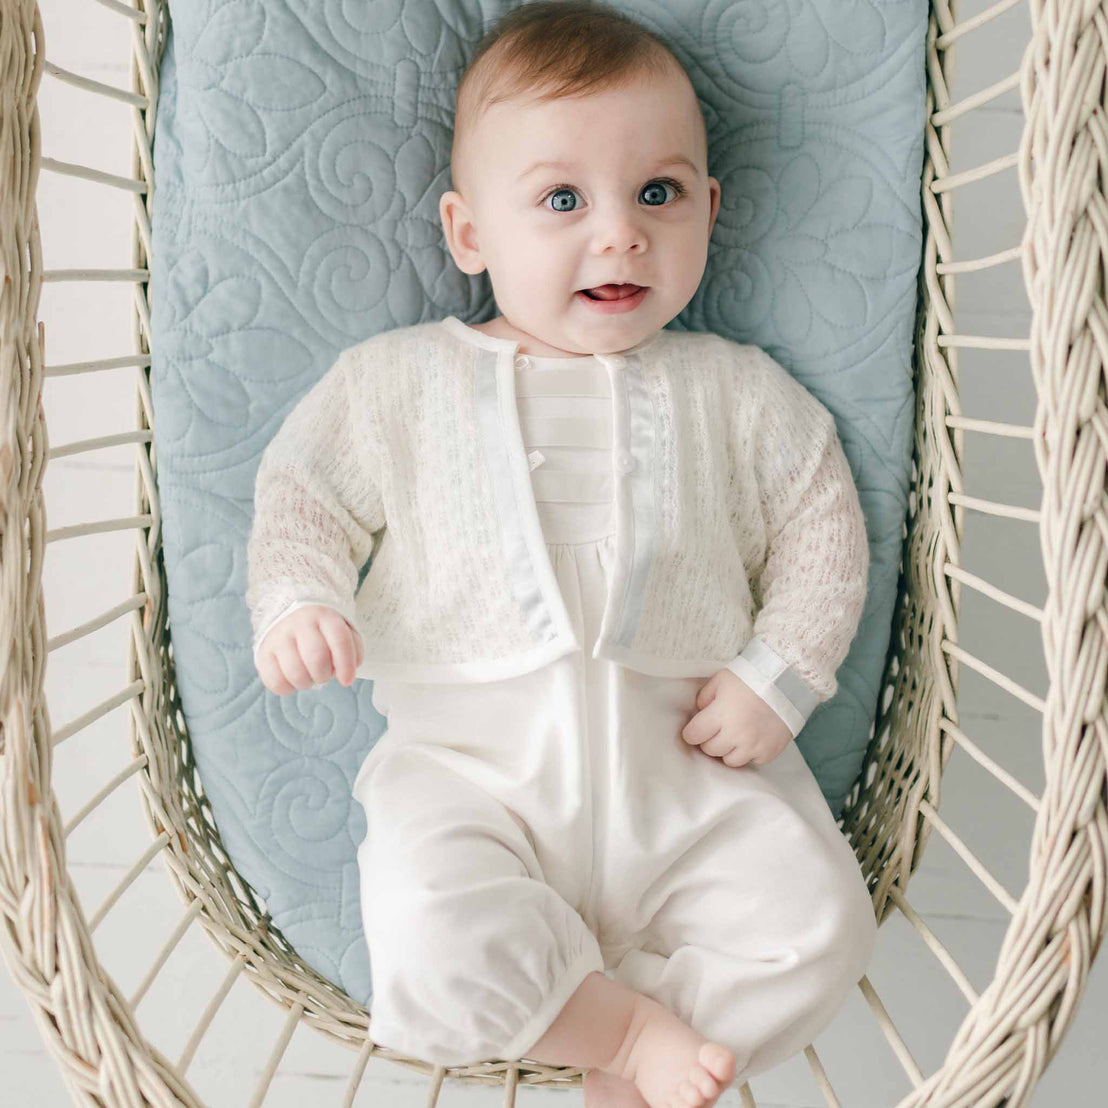 A joyful baby with blue eyes and light hair, wearing an Owen Knit Sweater adorned with a blue silk ribbon, lies in a woven basket, looking up with a bright smile.